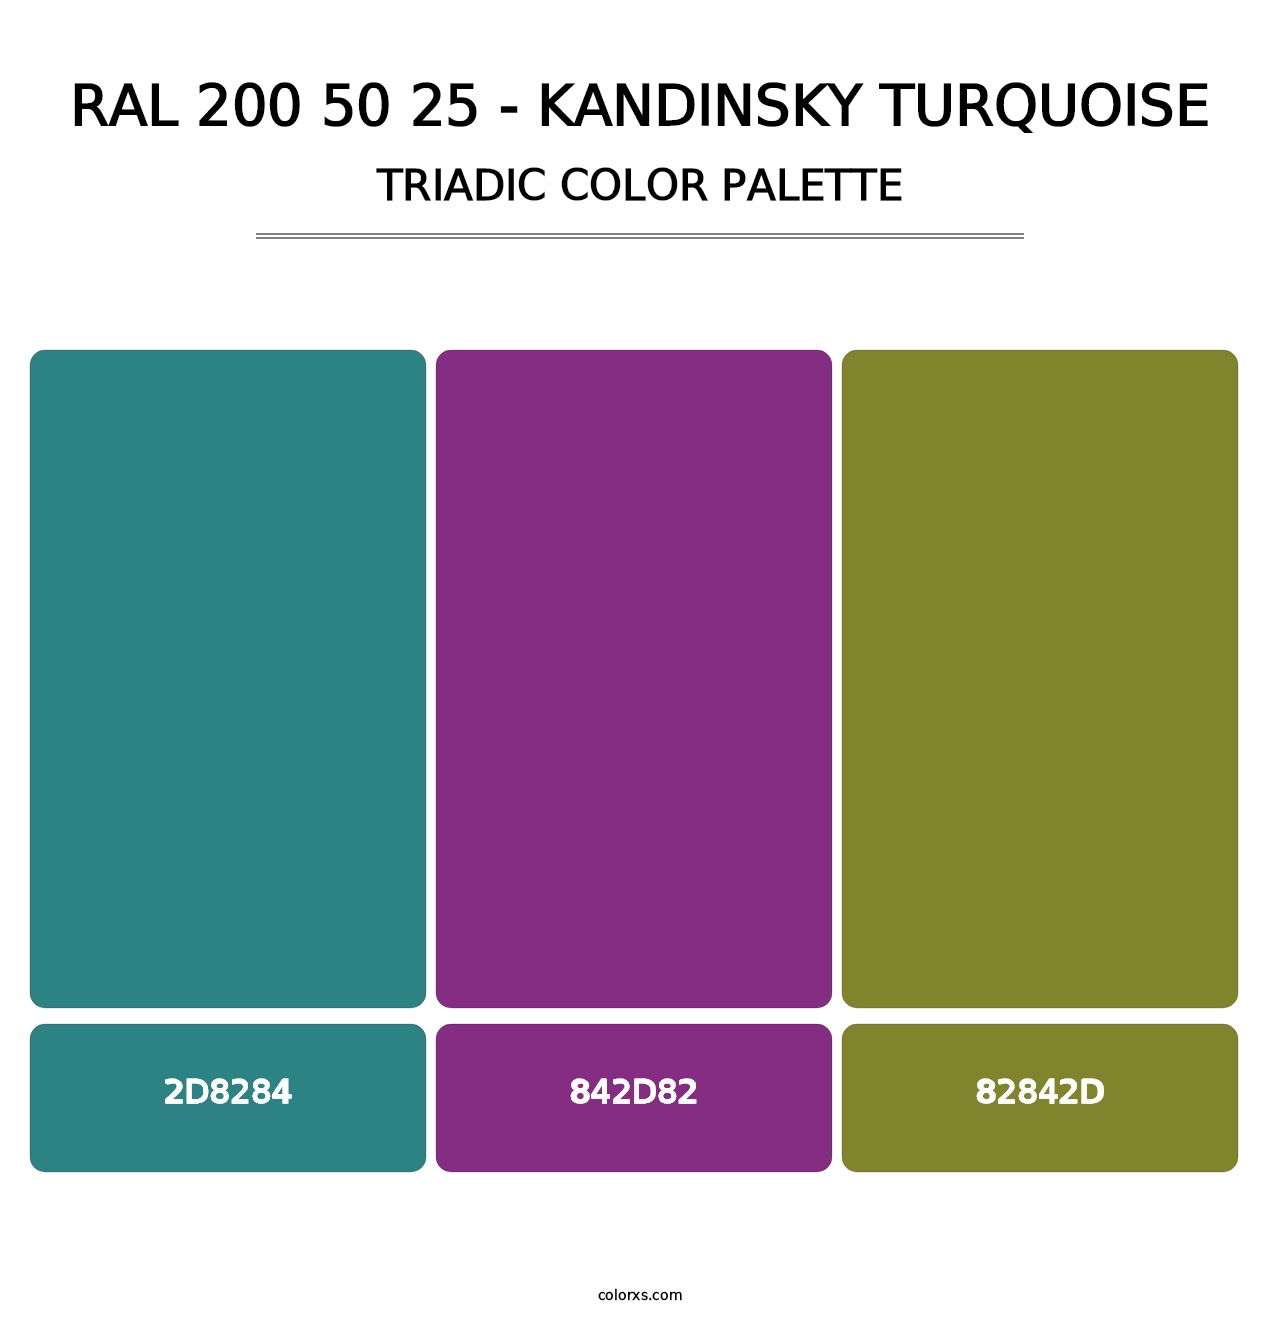 RAL 200 50 25 - Kandinsky Turquoise - Triadic Color Palette